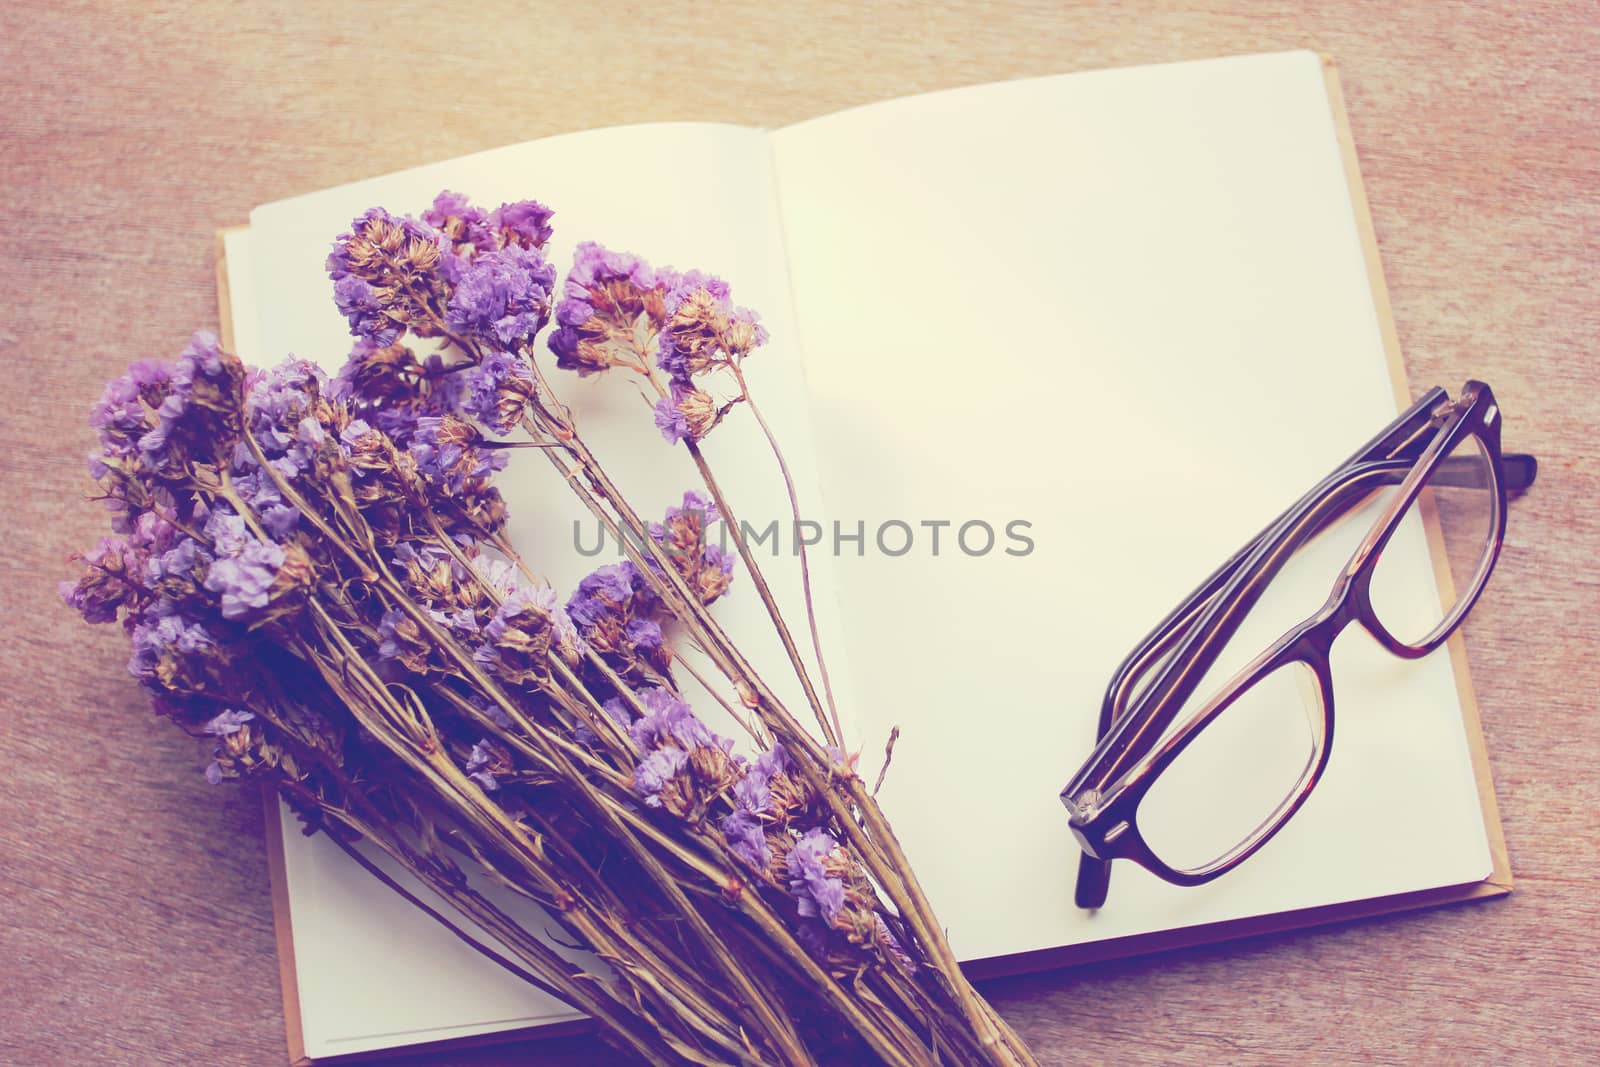 Blank notebook and dried statice flowers with eyeglasses, retro filter effect